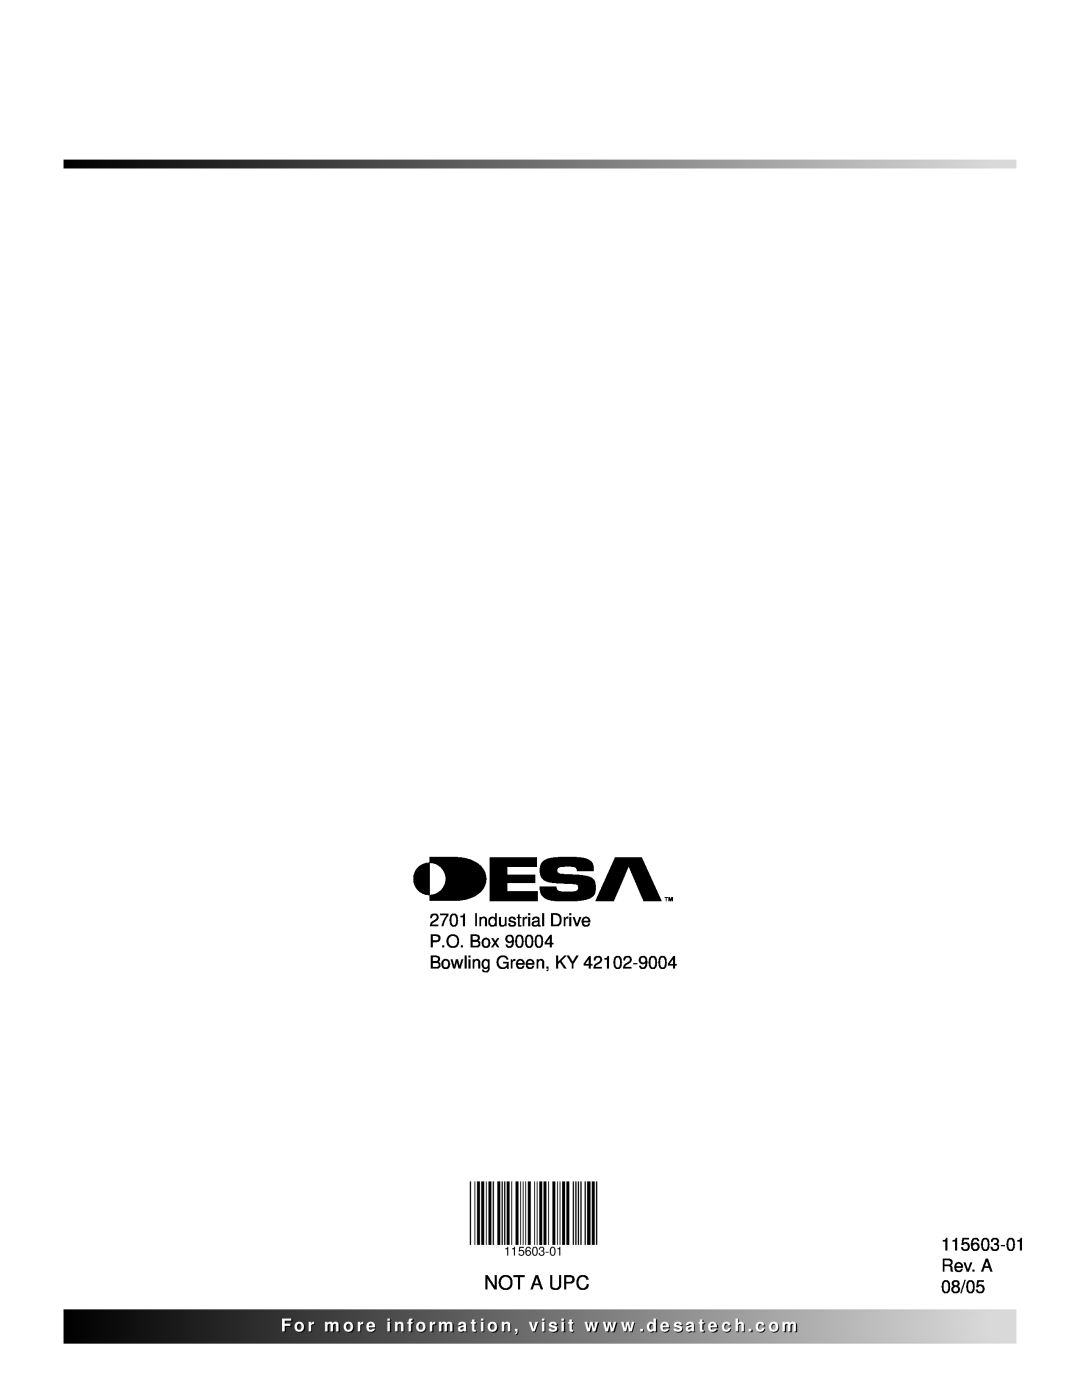 Desa (V)3612ST operating instructions Not A Upc, Industrial Drive P.O. Box Bowling Green, KY, 115603-01, Rev. A, 08/05 